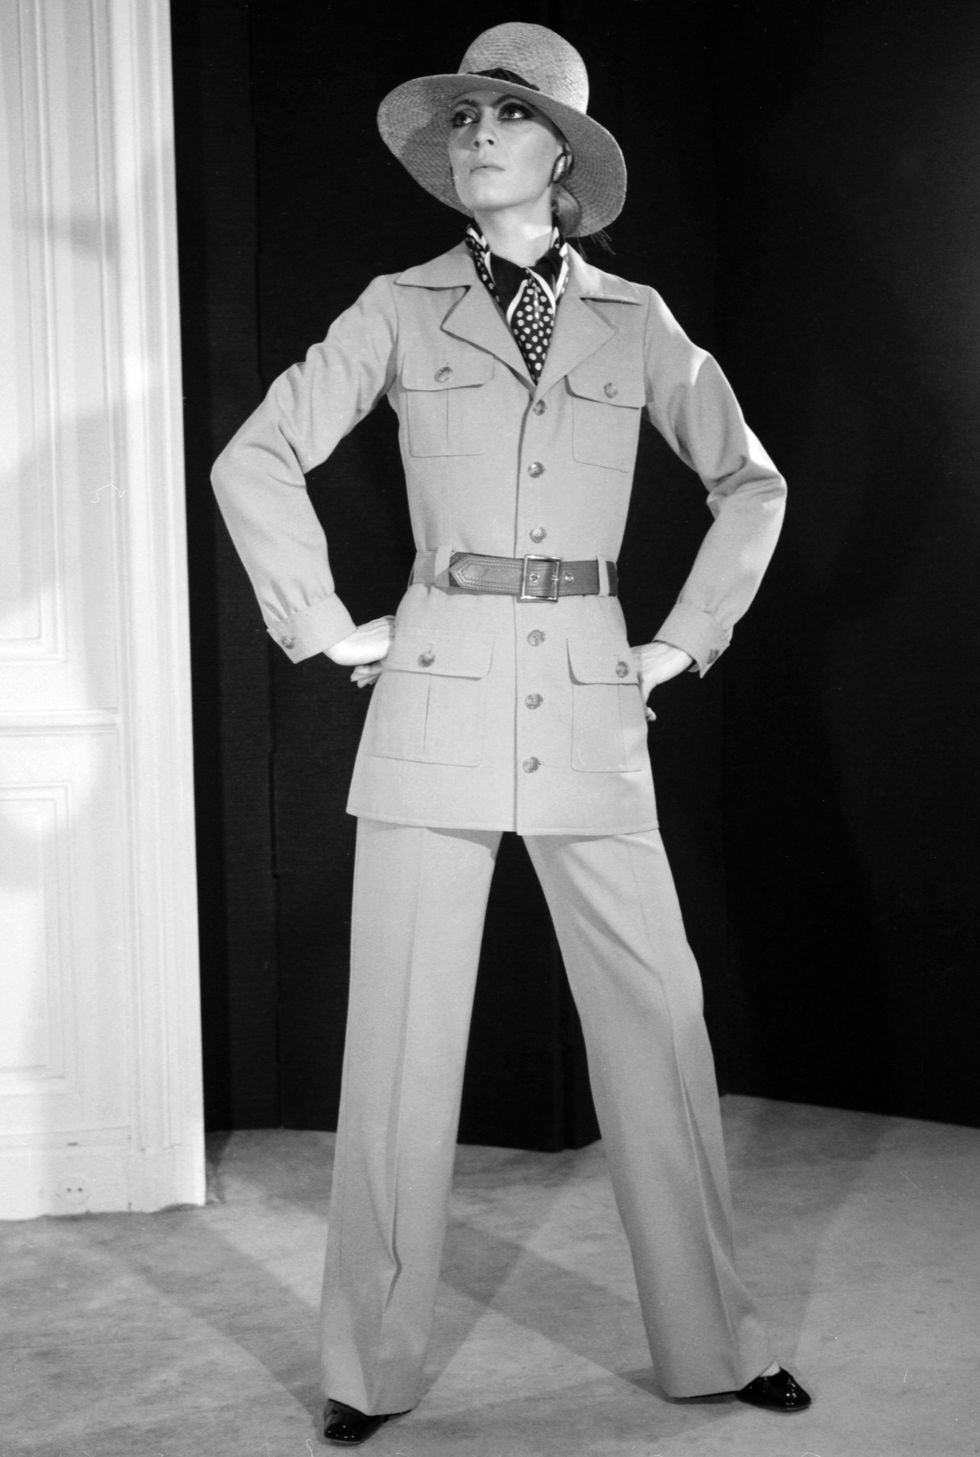 Standing, Uniform, Suit, Outerwear, Formal wear, Headgear, Military person, Military officer, Black-and-white, Style, 